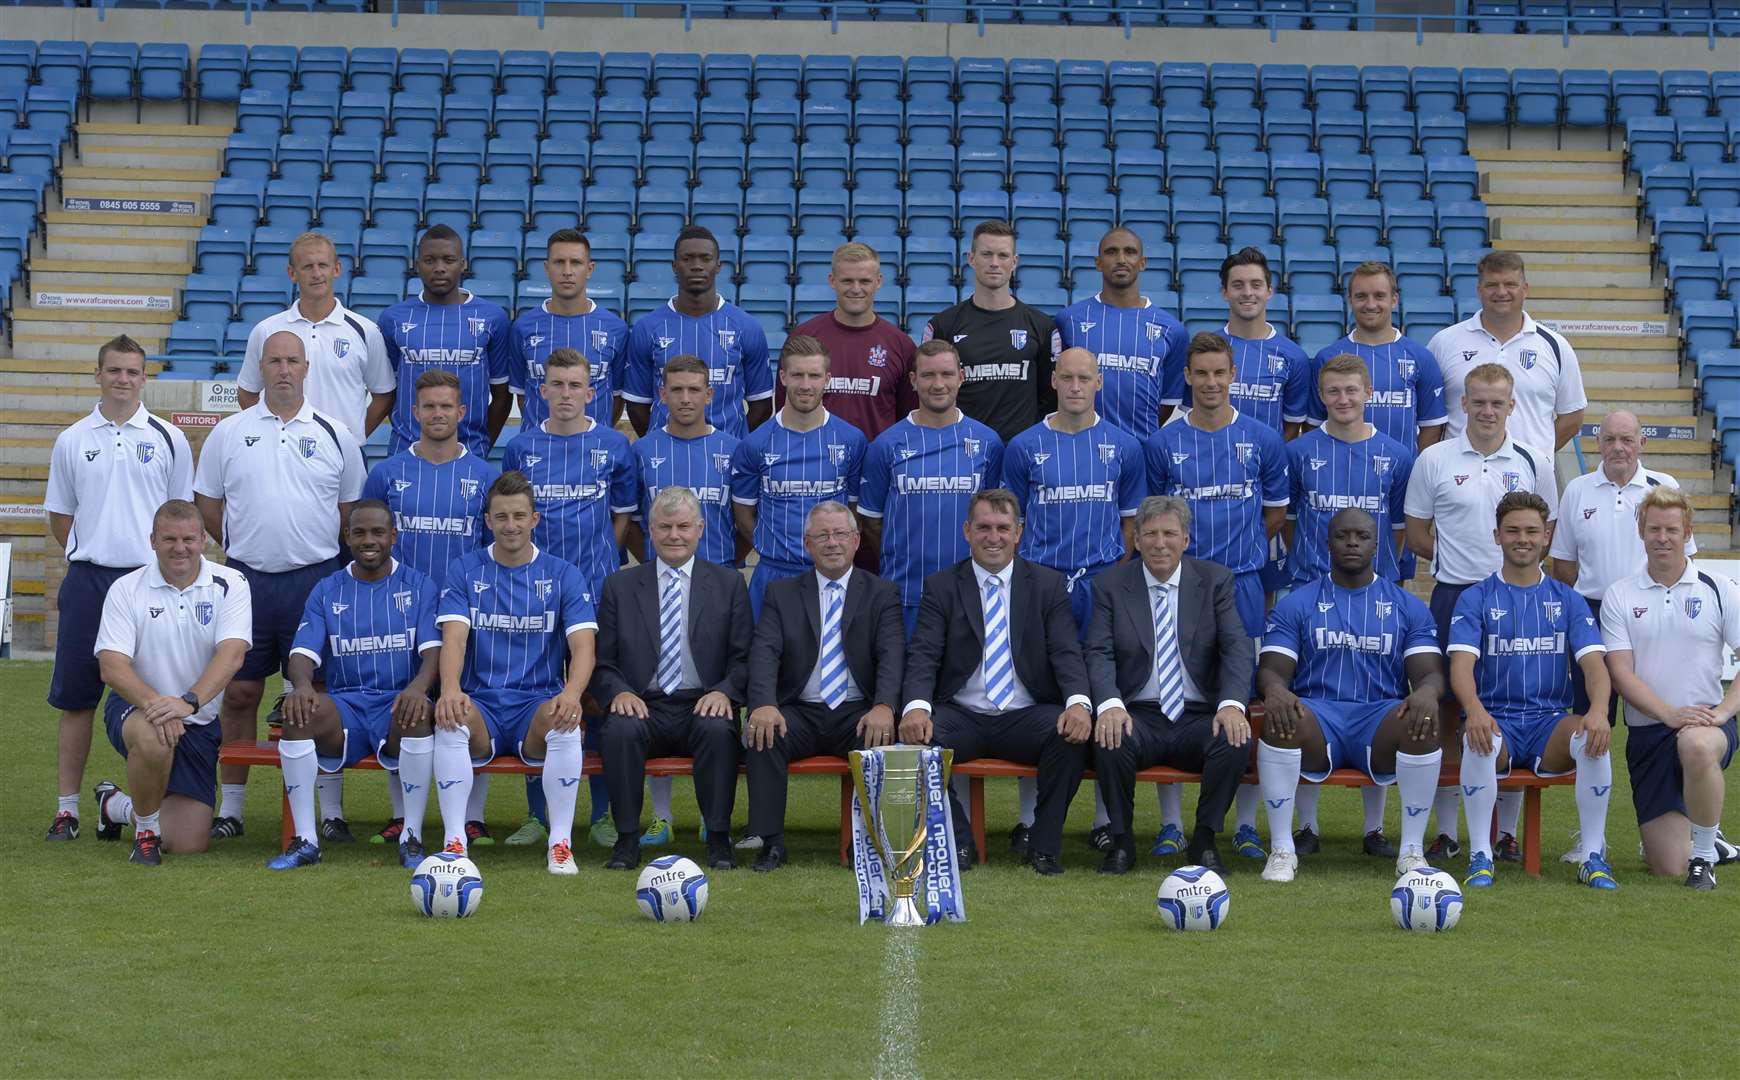 As Gillingham line up for the squad photo ahead of the 2013/14 season, Darren Hare, now a Faversham coach, is back row, far right and Adebayo Akinfenwa is front row, third from right. Picture: Andy Payton